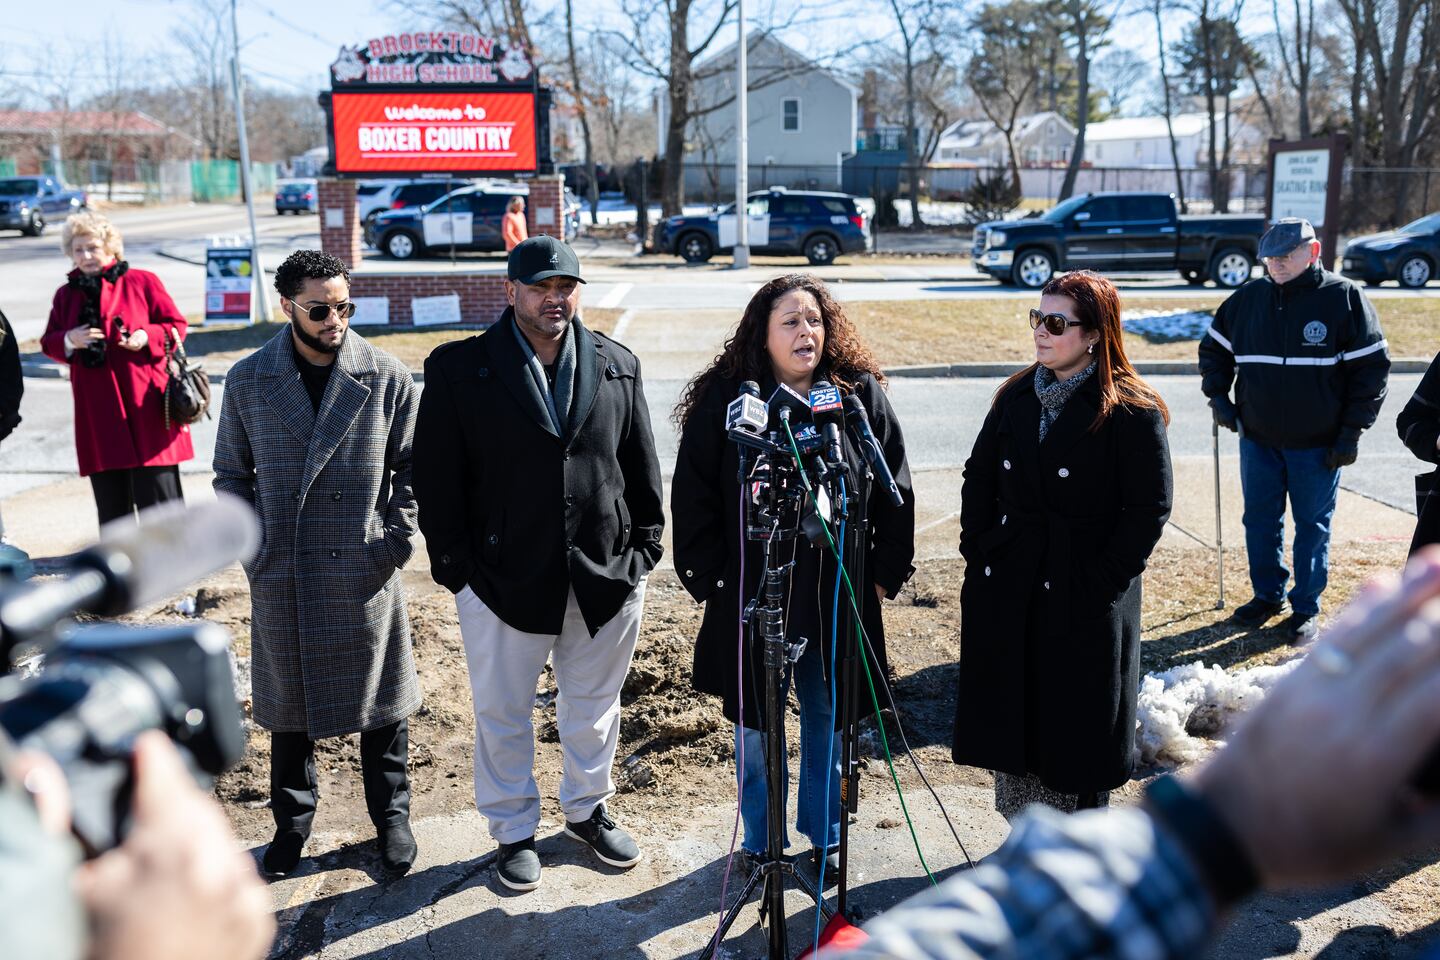 Members of the Brockton School Committee, from left to right, Claudio Gomes, Tony Rodrigues, Joyce Asack, and Ana Oliver, held a press conference at Brockton High School Monday afternoon, after requesting the National Guard be deployed to curb violence at the school.